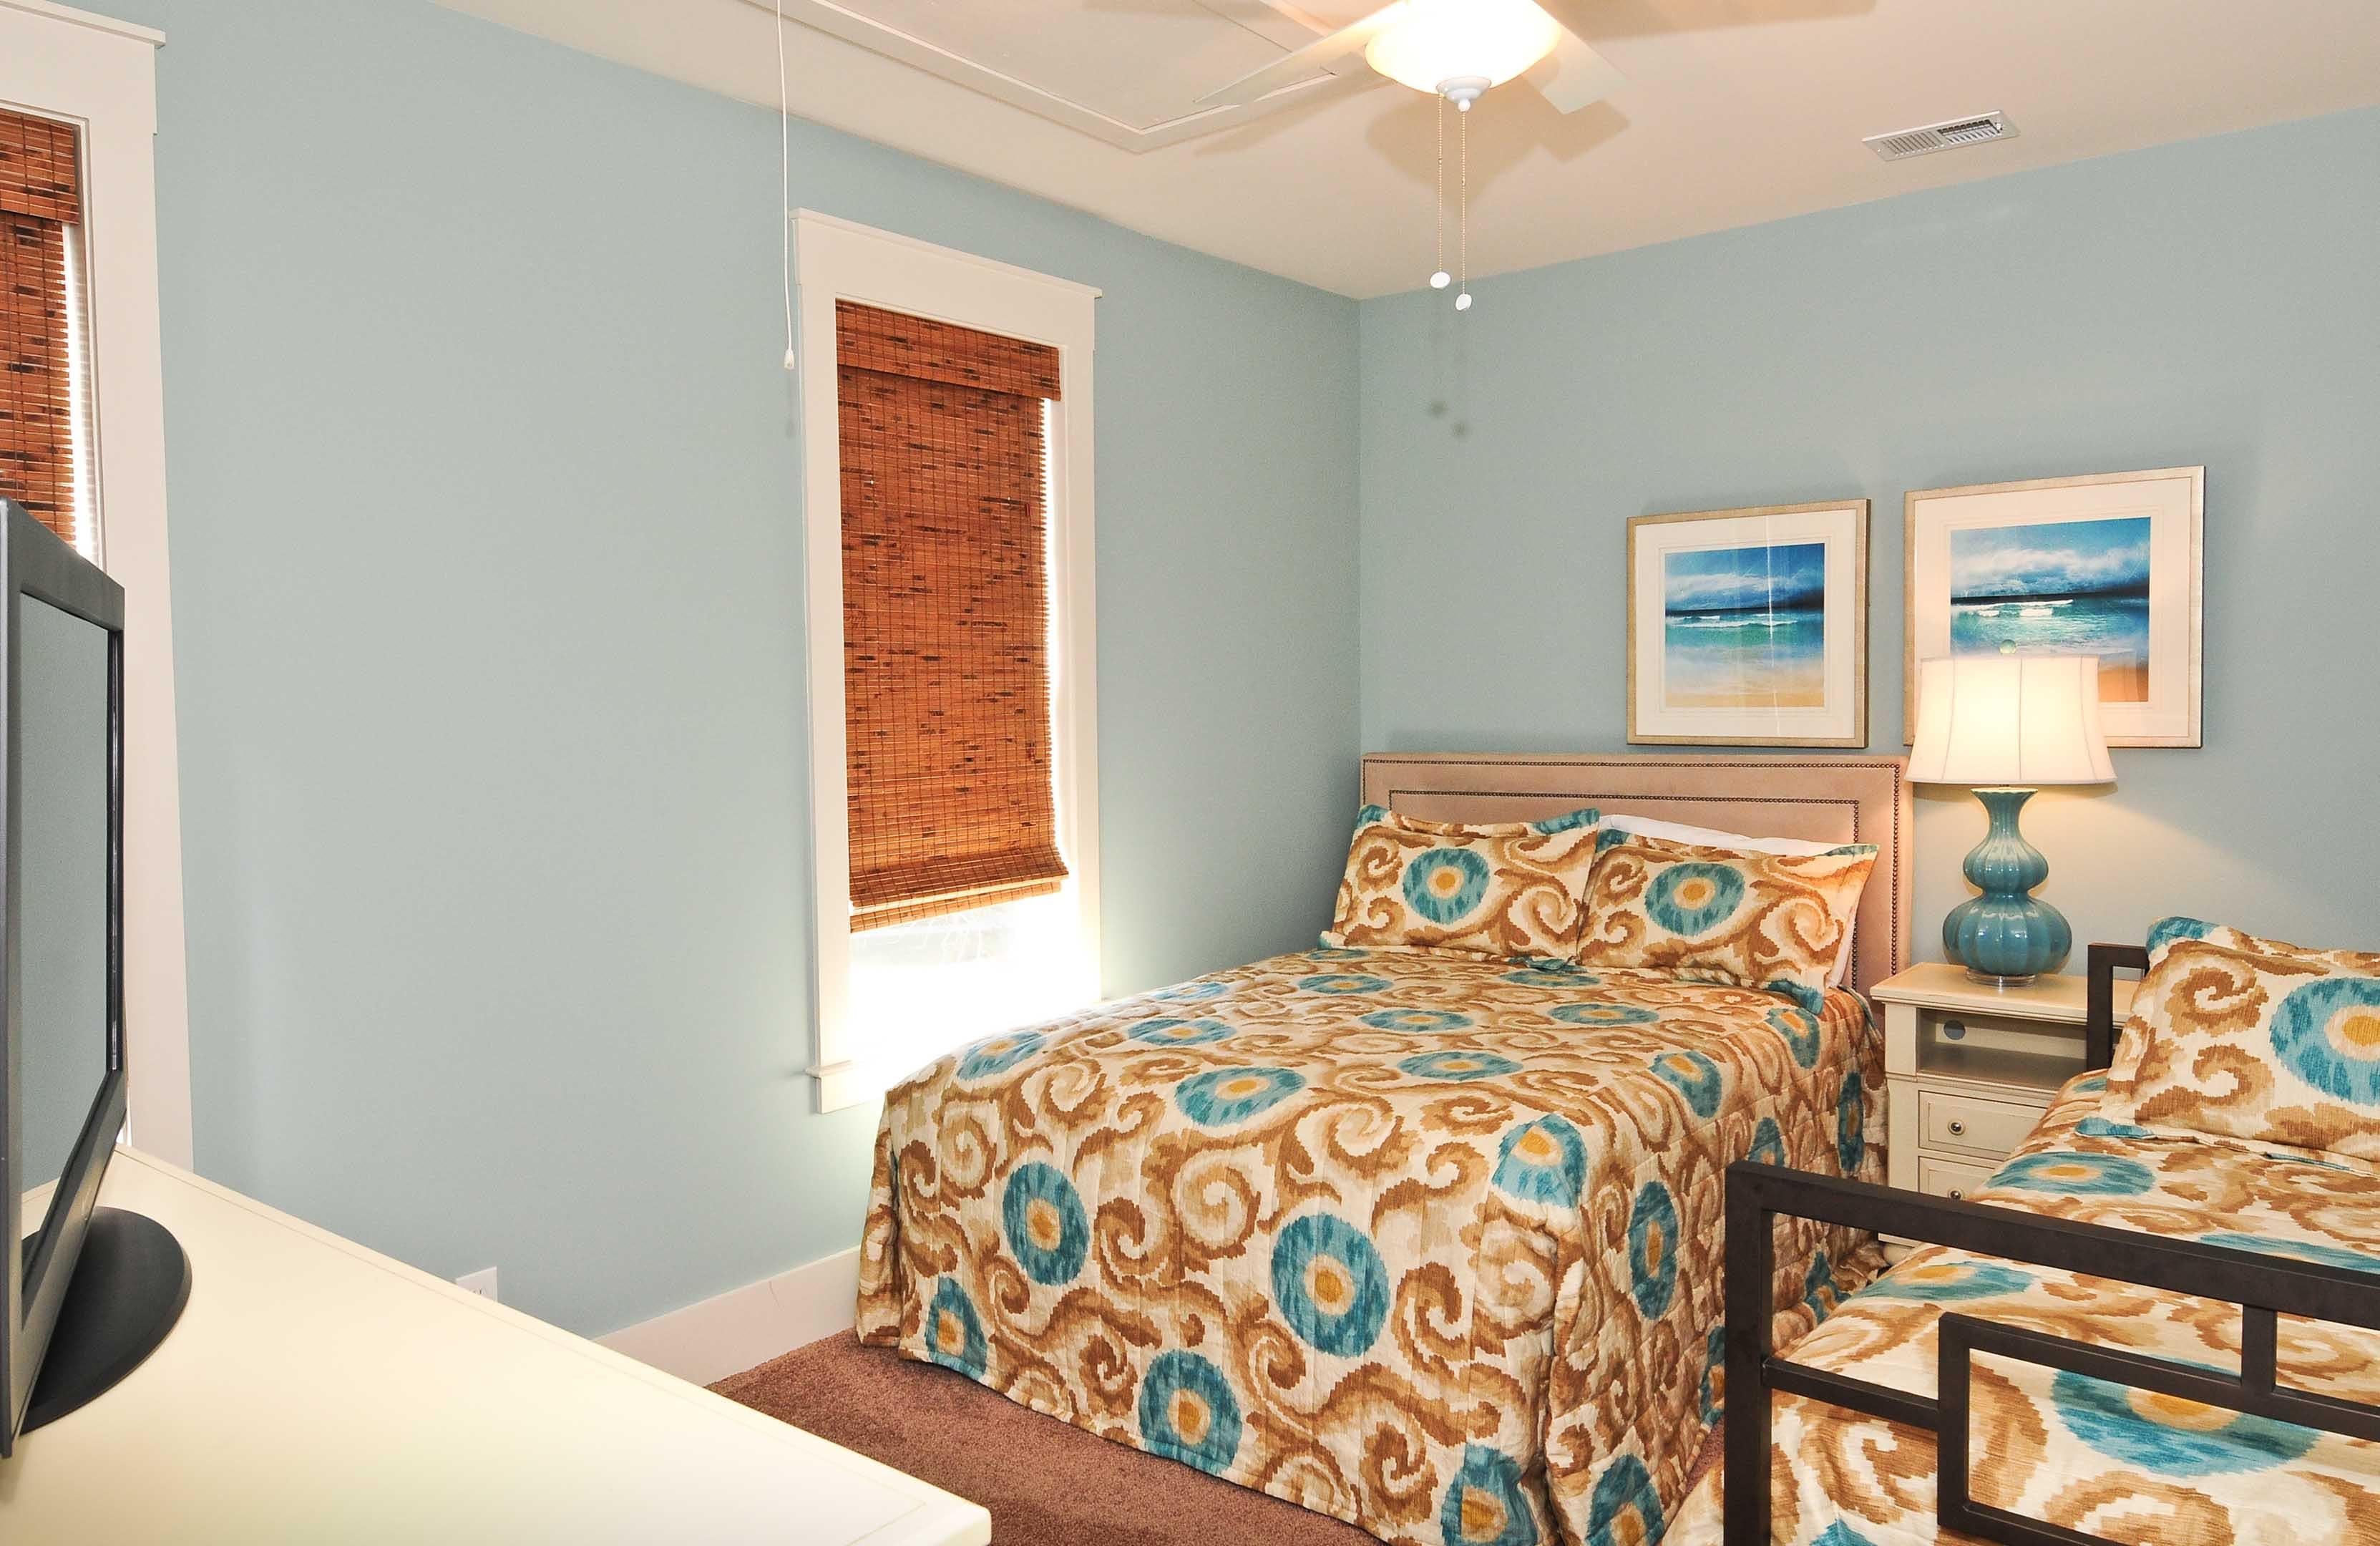 North Beach Cottages - 3 Bedroom Banyan Luxury Home w/ Private Pool